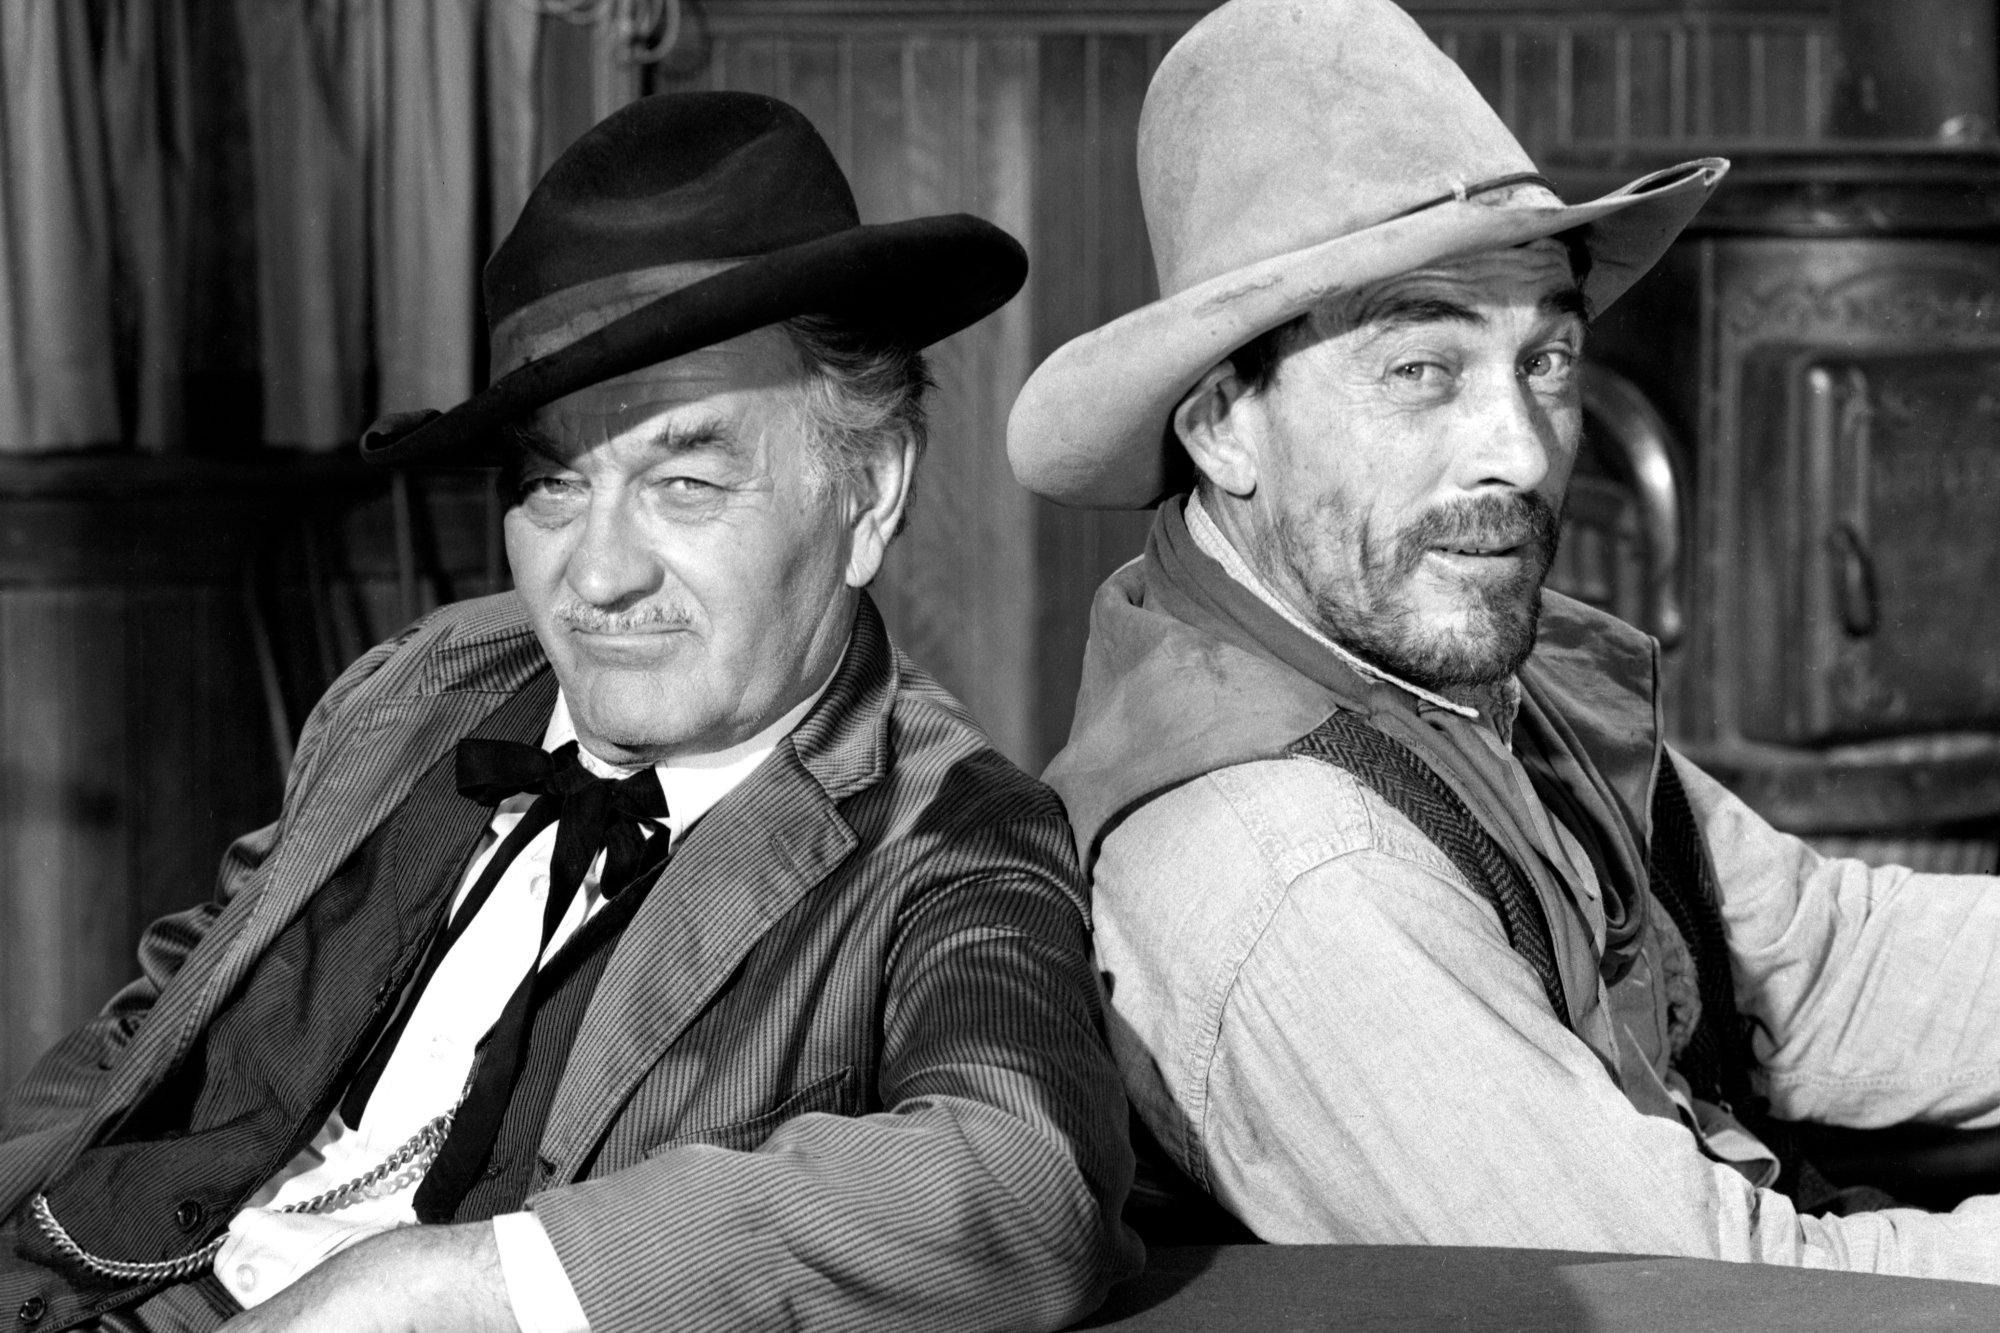 'Gunsmoke' Milburn Stone as Doc Adams and Ken Curtis as Festus Haggen leaning against one another with their shoulders toward one another. They're wearing Western costumes with slight smiles on their faces in a black-and-white photograph.